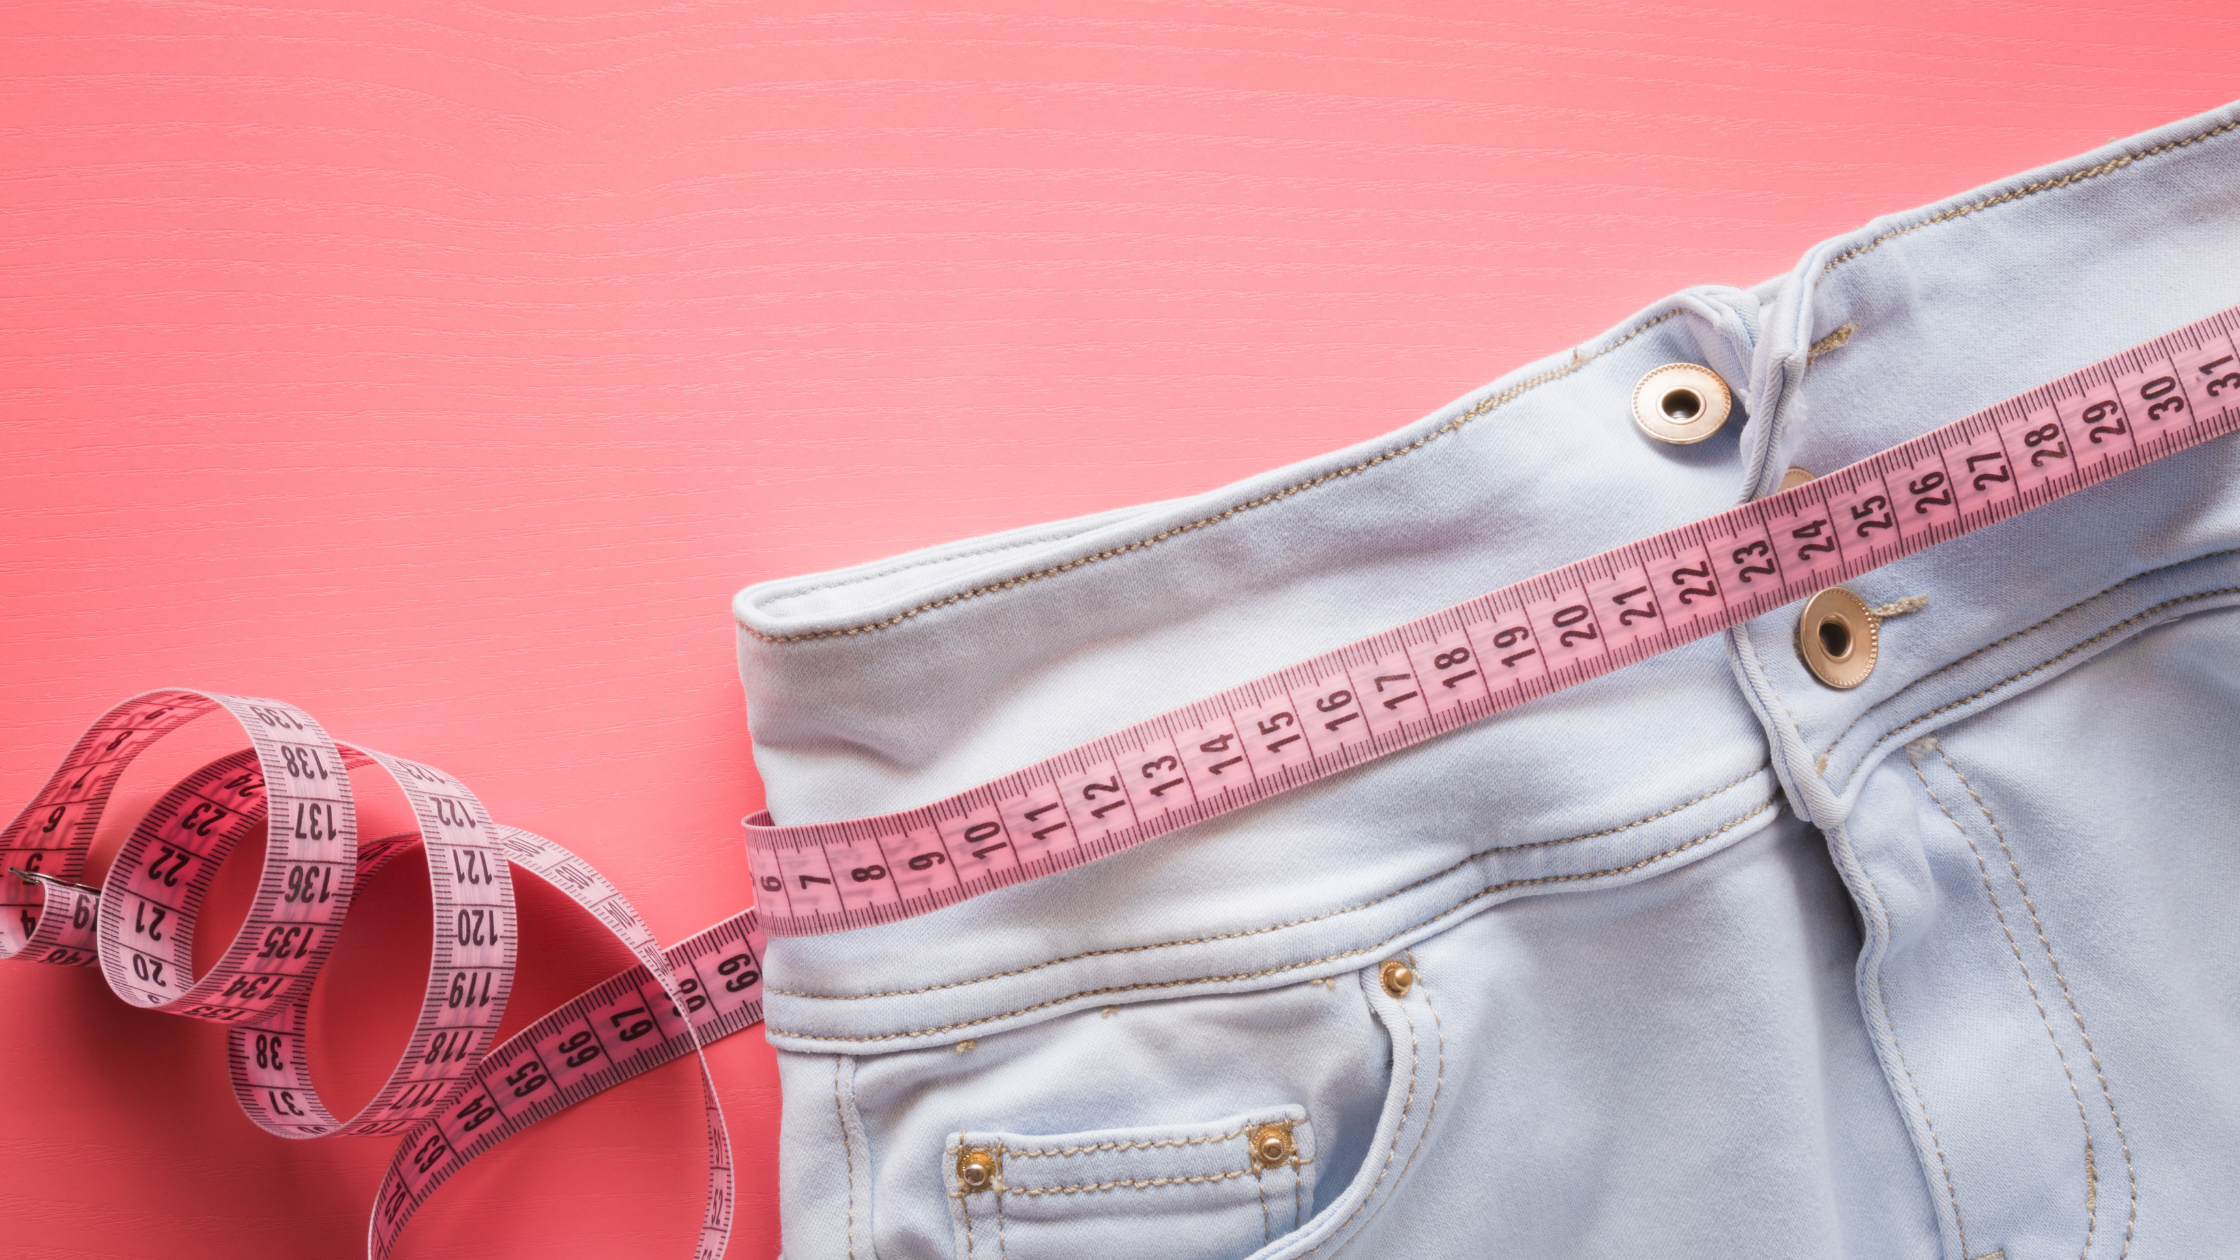 Measuring tape on a pair of jeans; Being overweight is actually a contributing factor to many types of incontinence